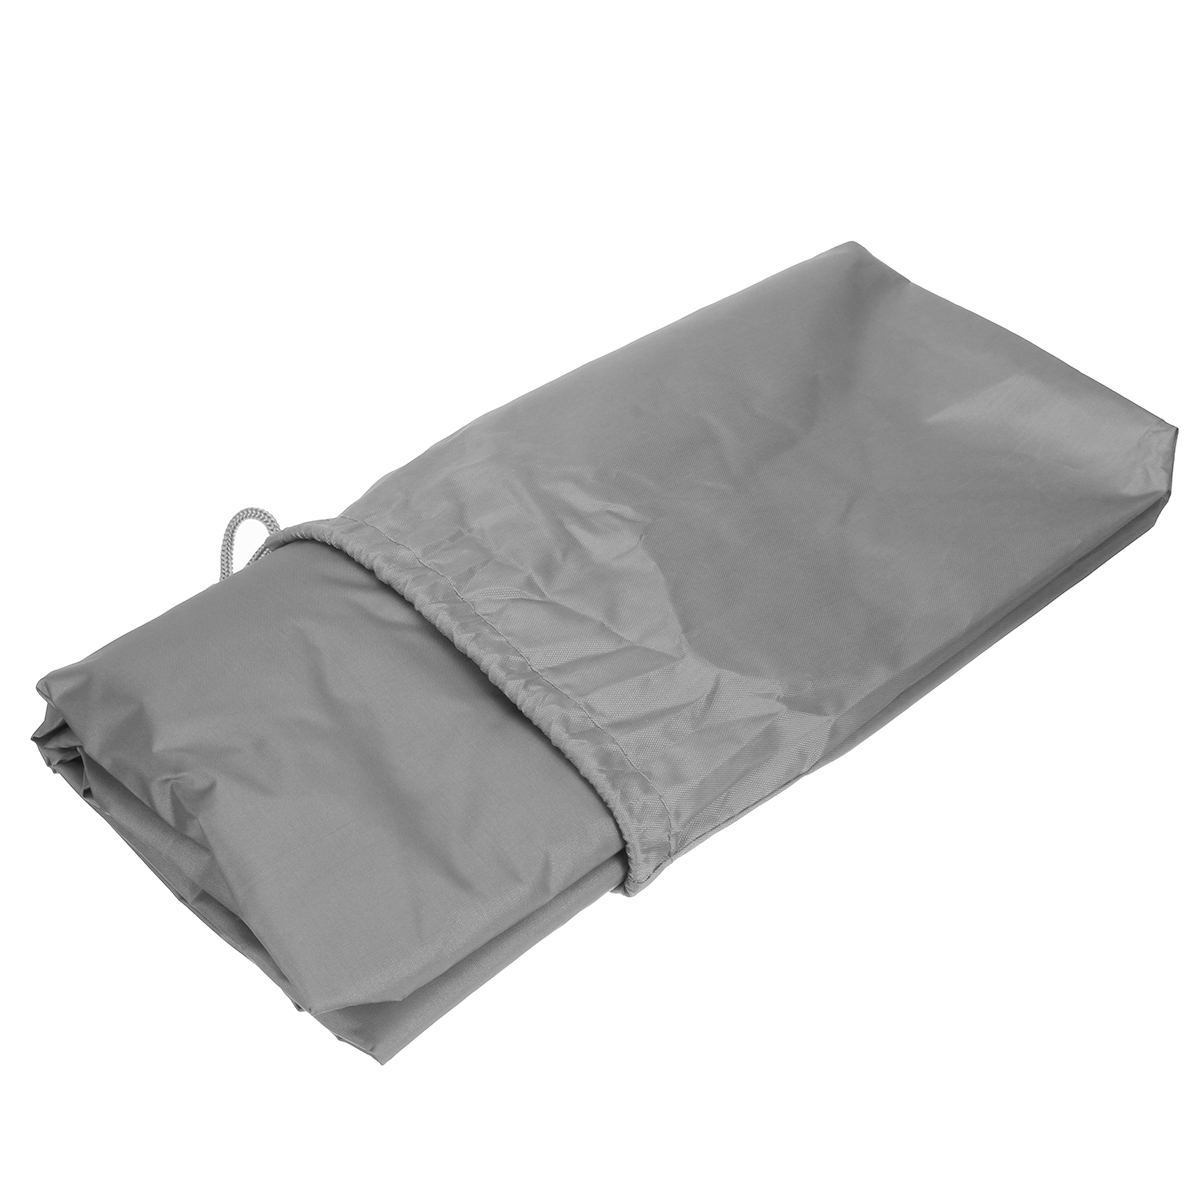 Waterproof Home Outdoor Patio Garden Furniture Cover Rain Snow Chair Covers for Sofa Table Chair Dustproof Protection Cover